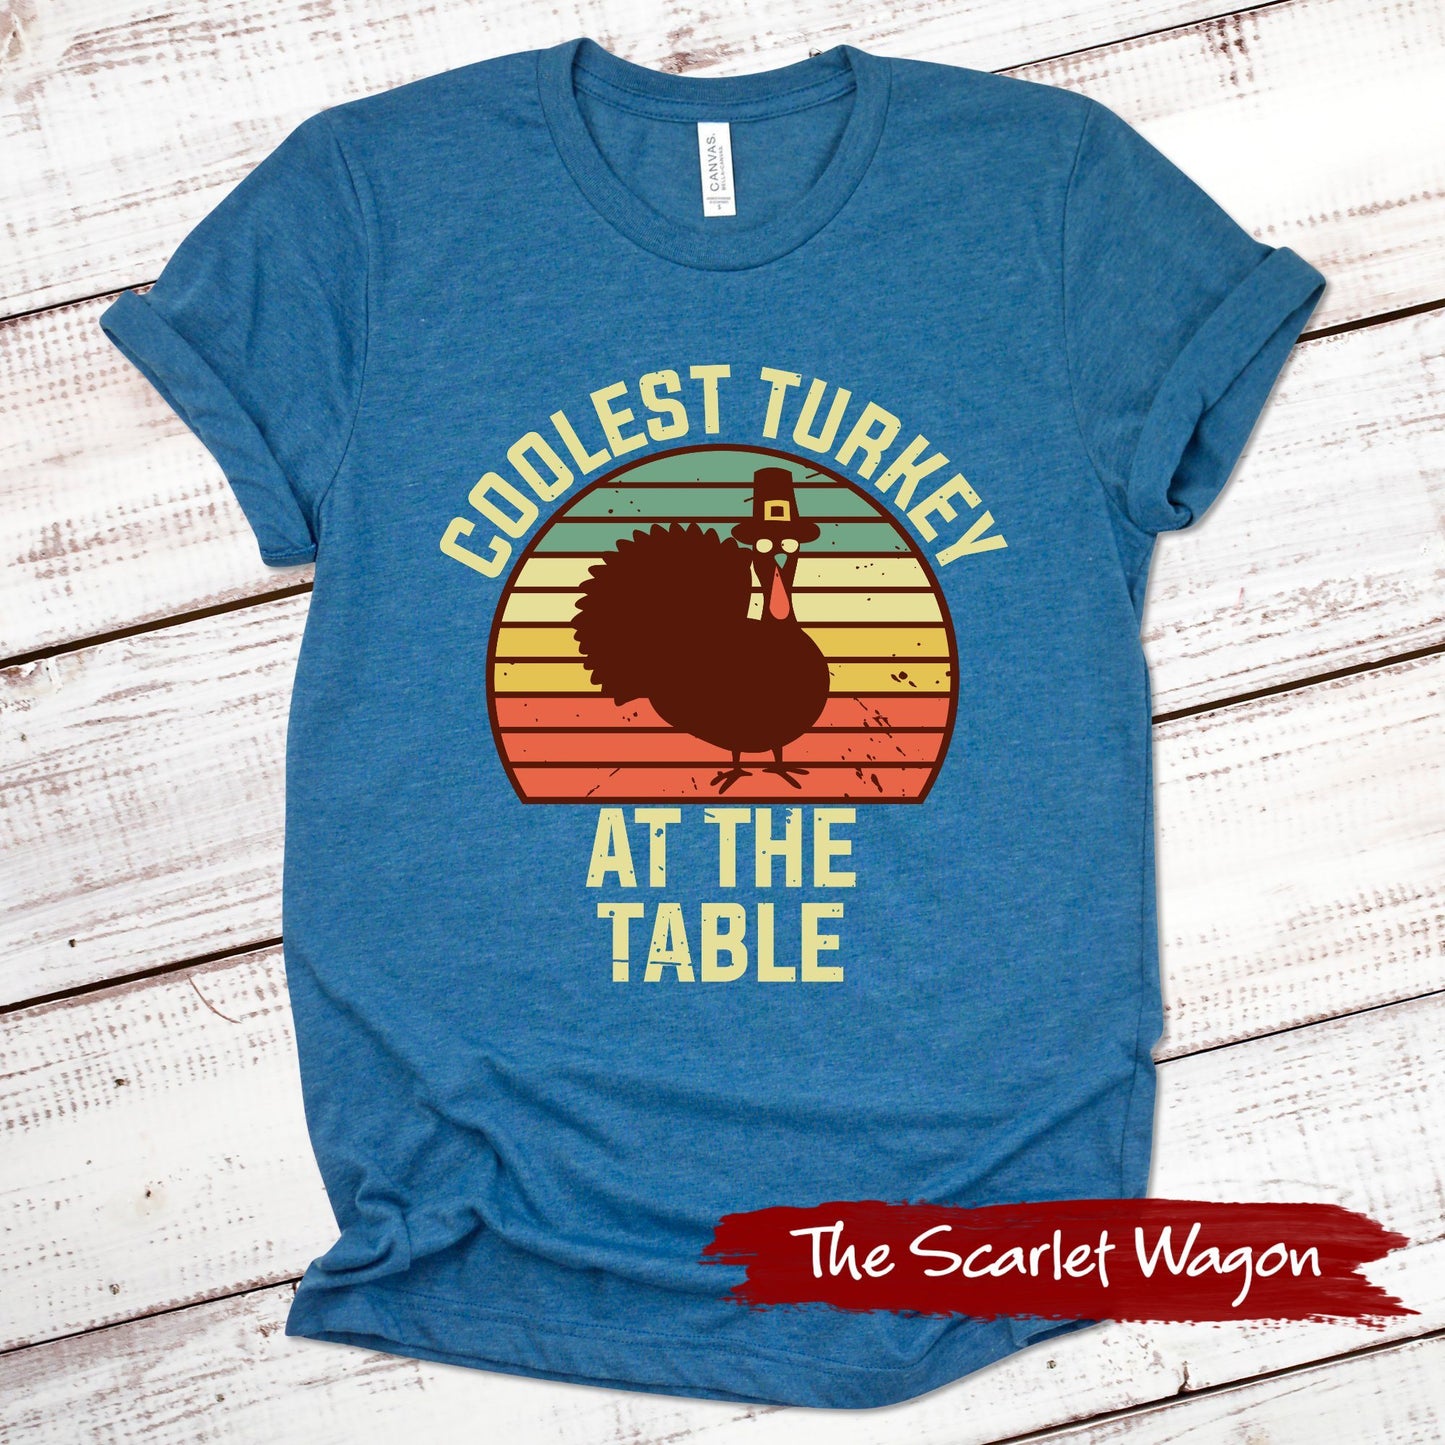 Coolest Turkey at the Table Fall Shirts Scarlet Wagon Heather Deep Teal XS 